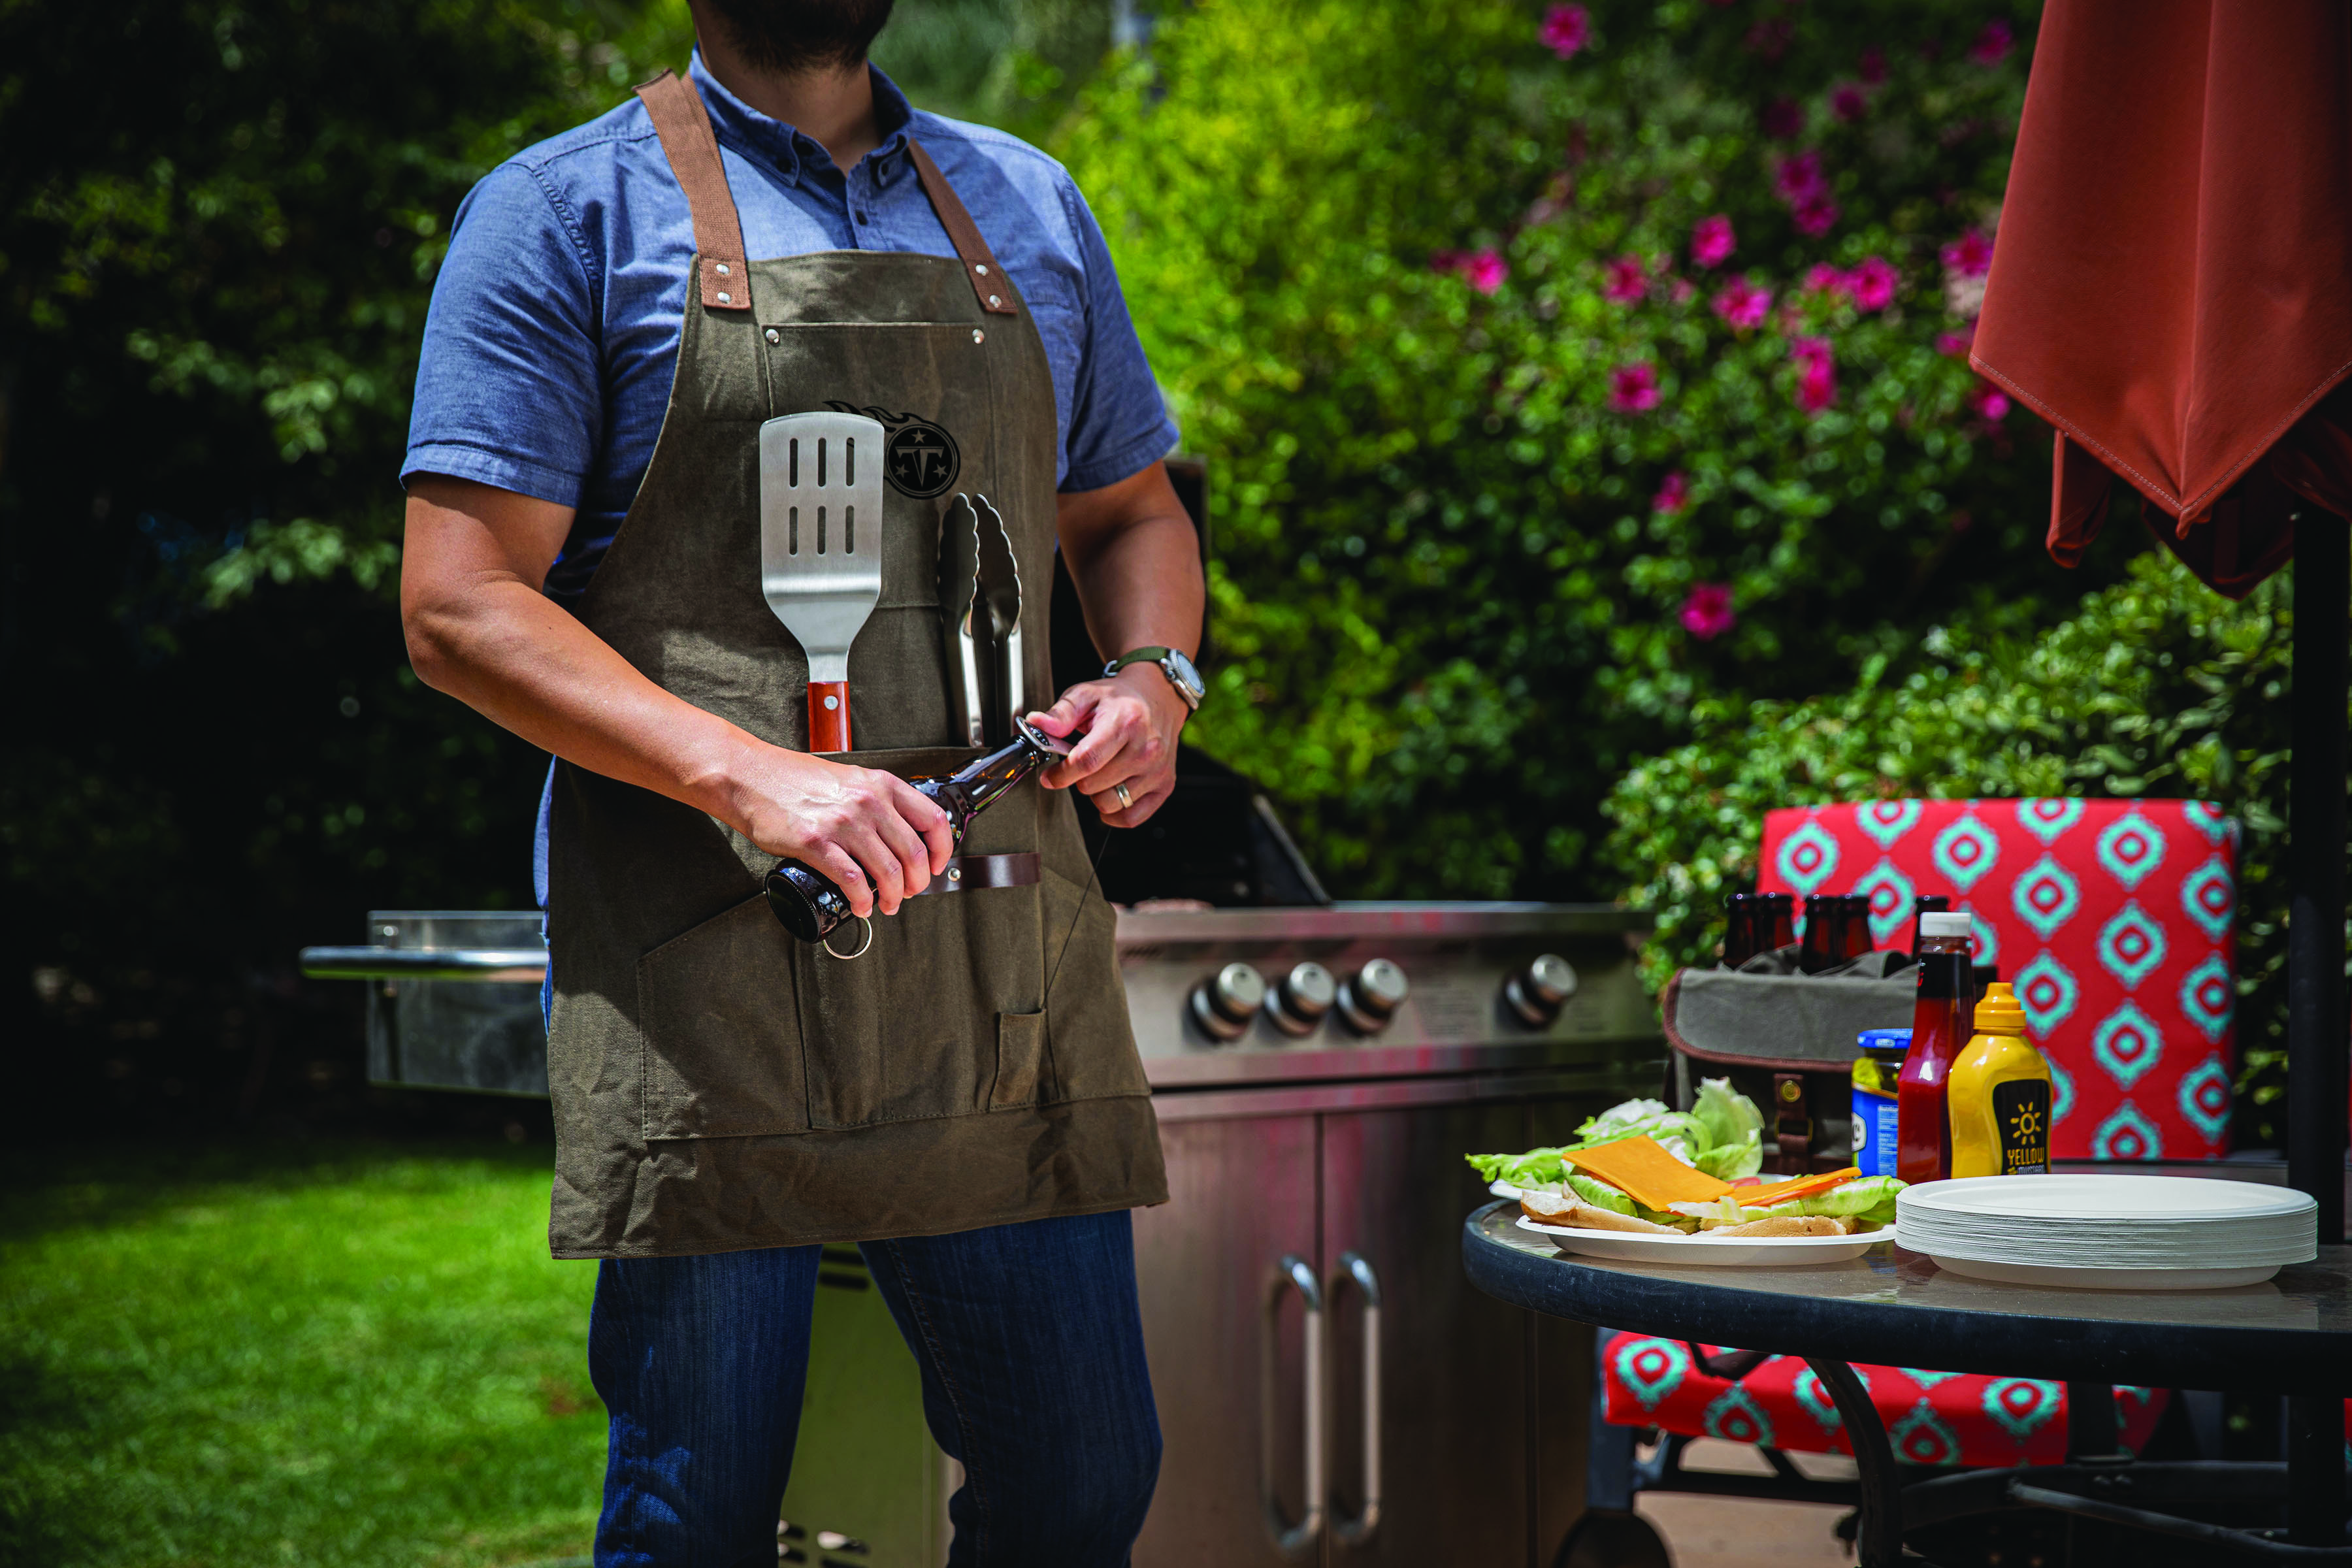 Tennessee Titans - BBQ Apron with Tools & Bottle Opener